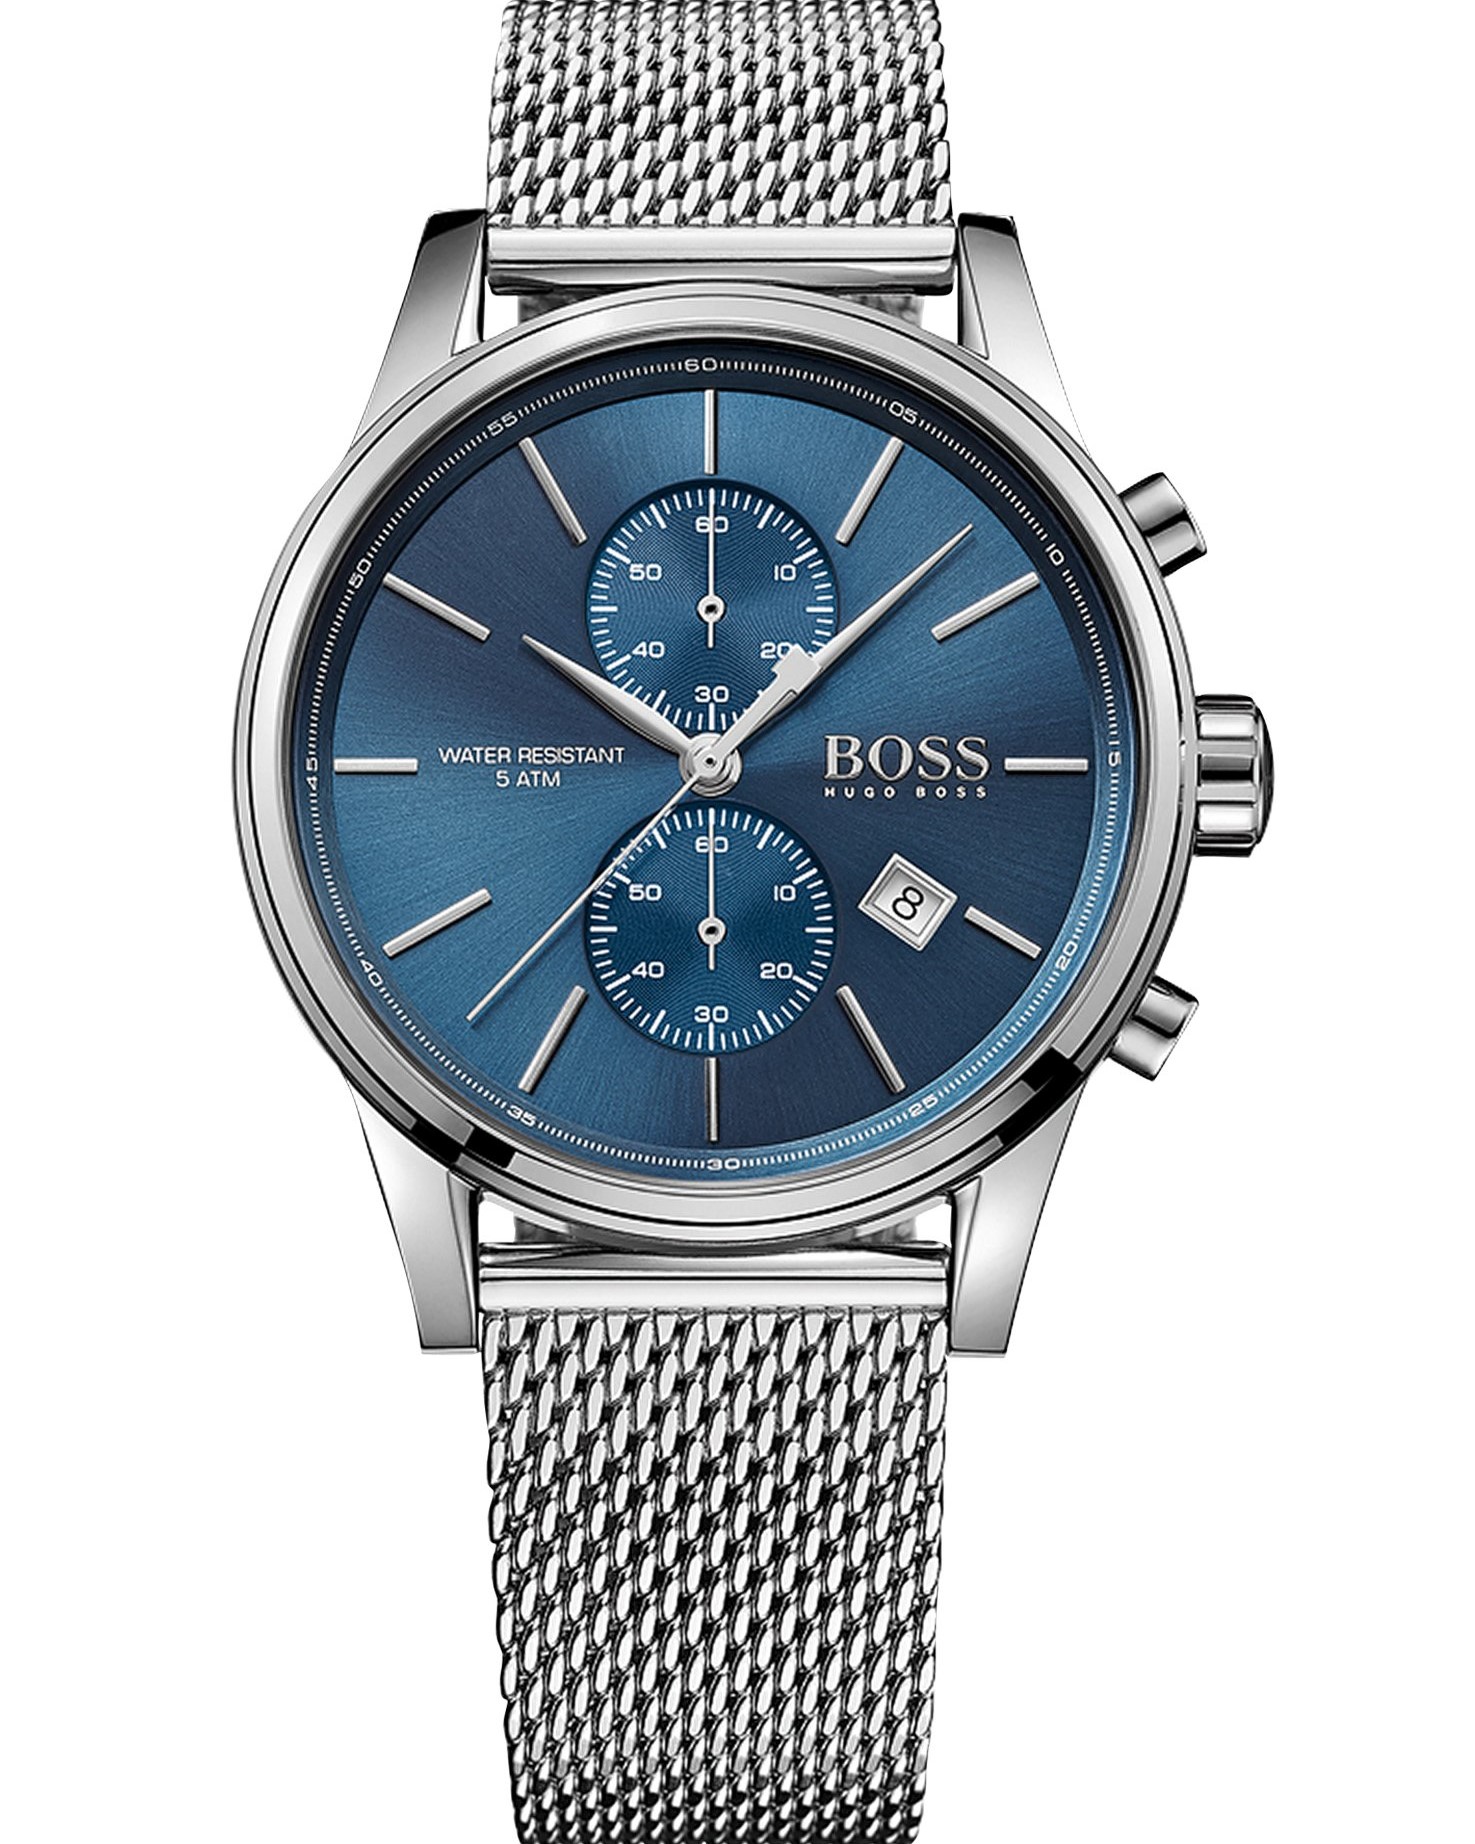 ĐỒNG HỒ ĐEO TAY NAM HUGO BOSS 1513441 MENS JET STAINLESS STEEL BLUE DIAL MESH STRAP CHRONOGRAPH WATCH 12